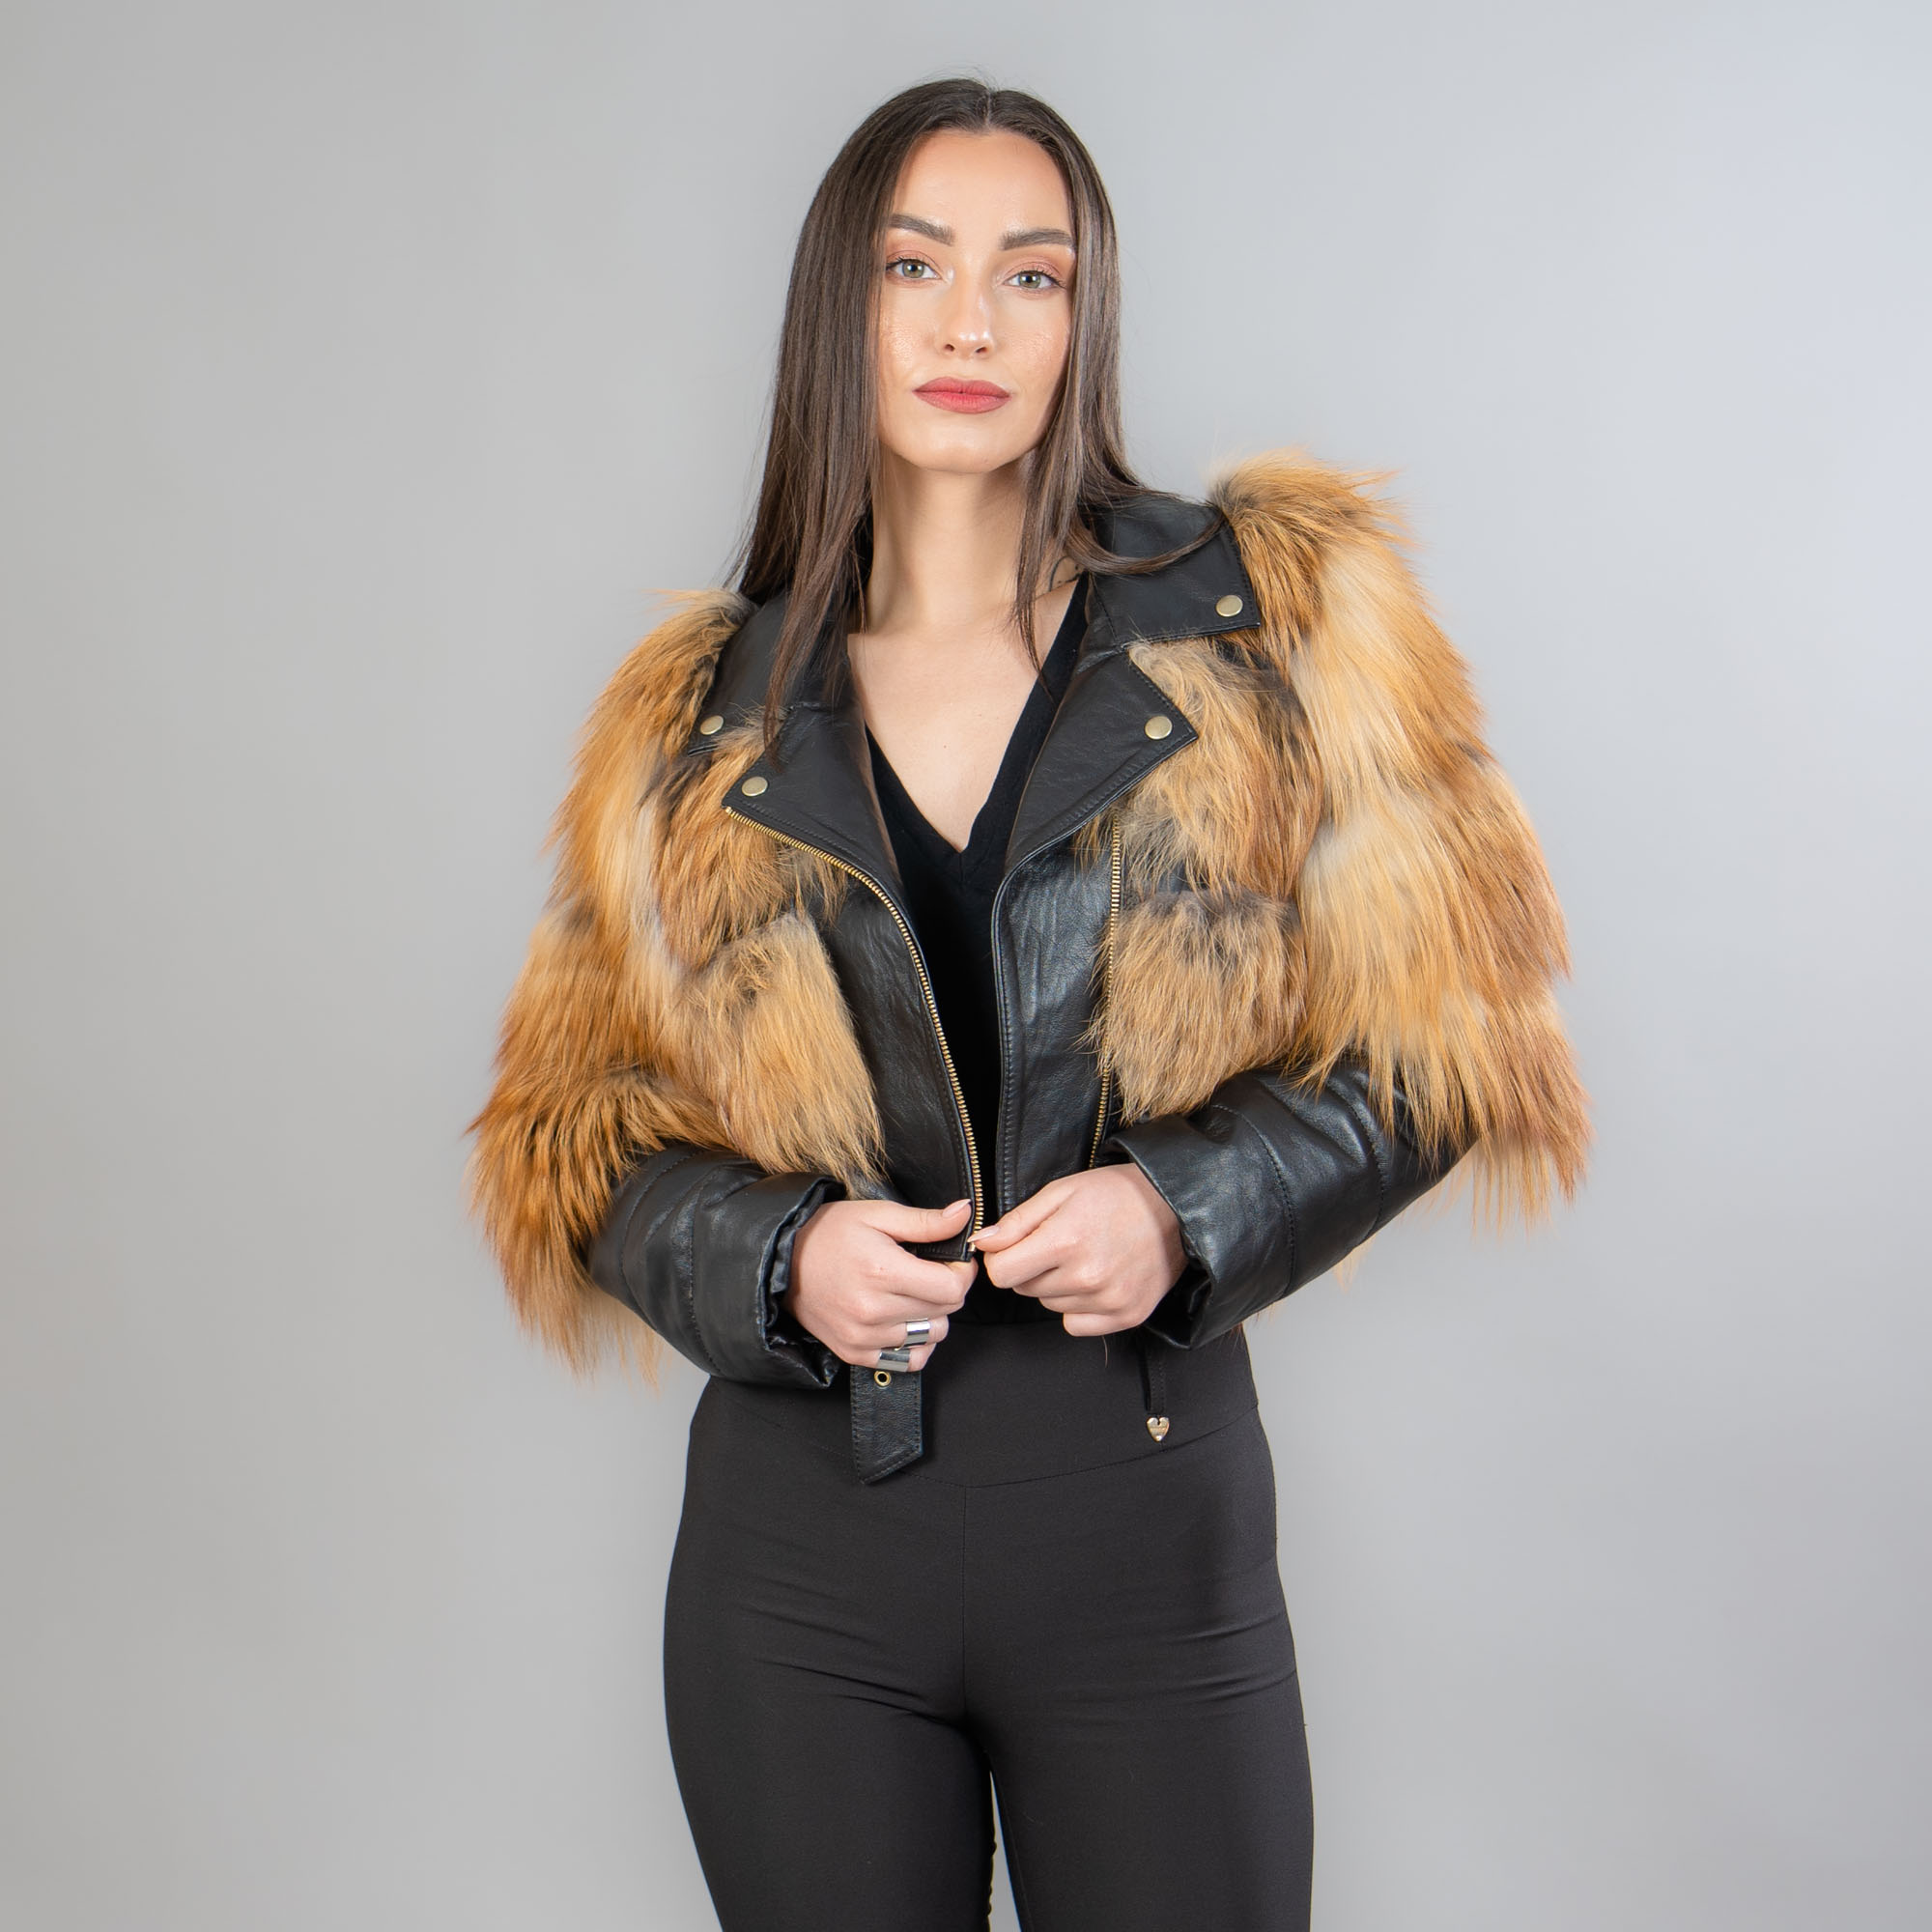 Red short fox fur jacket with leather